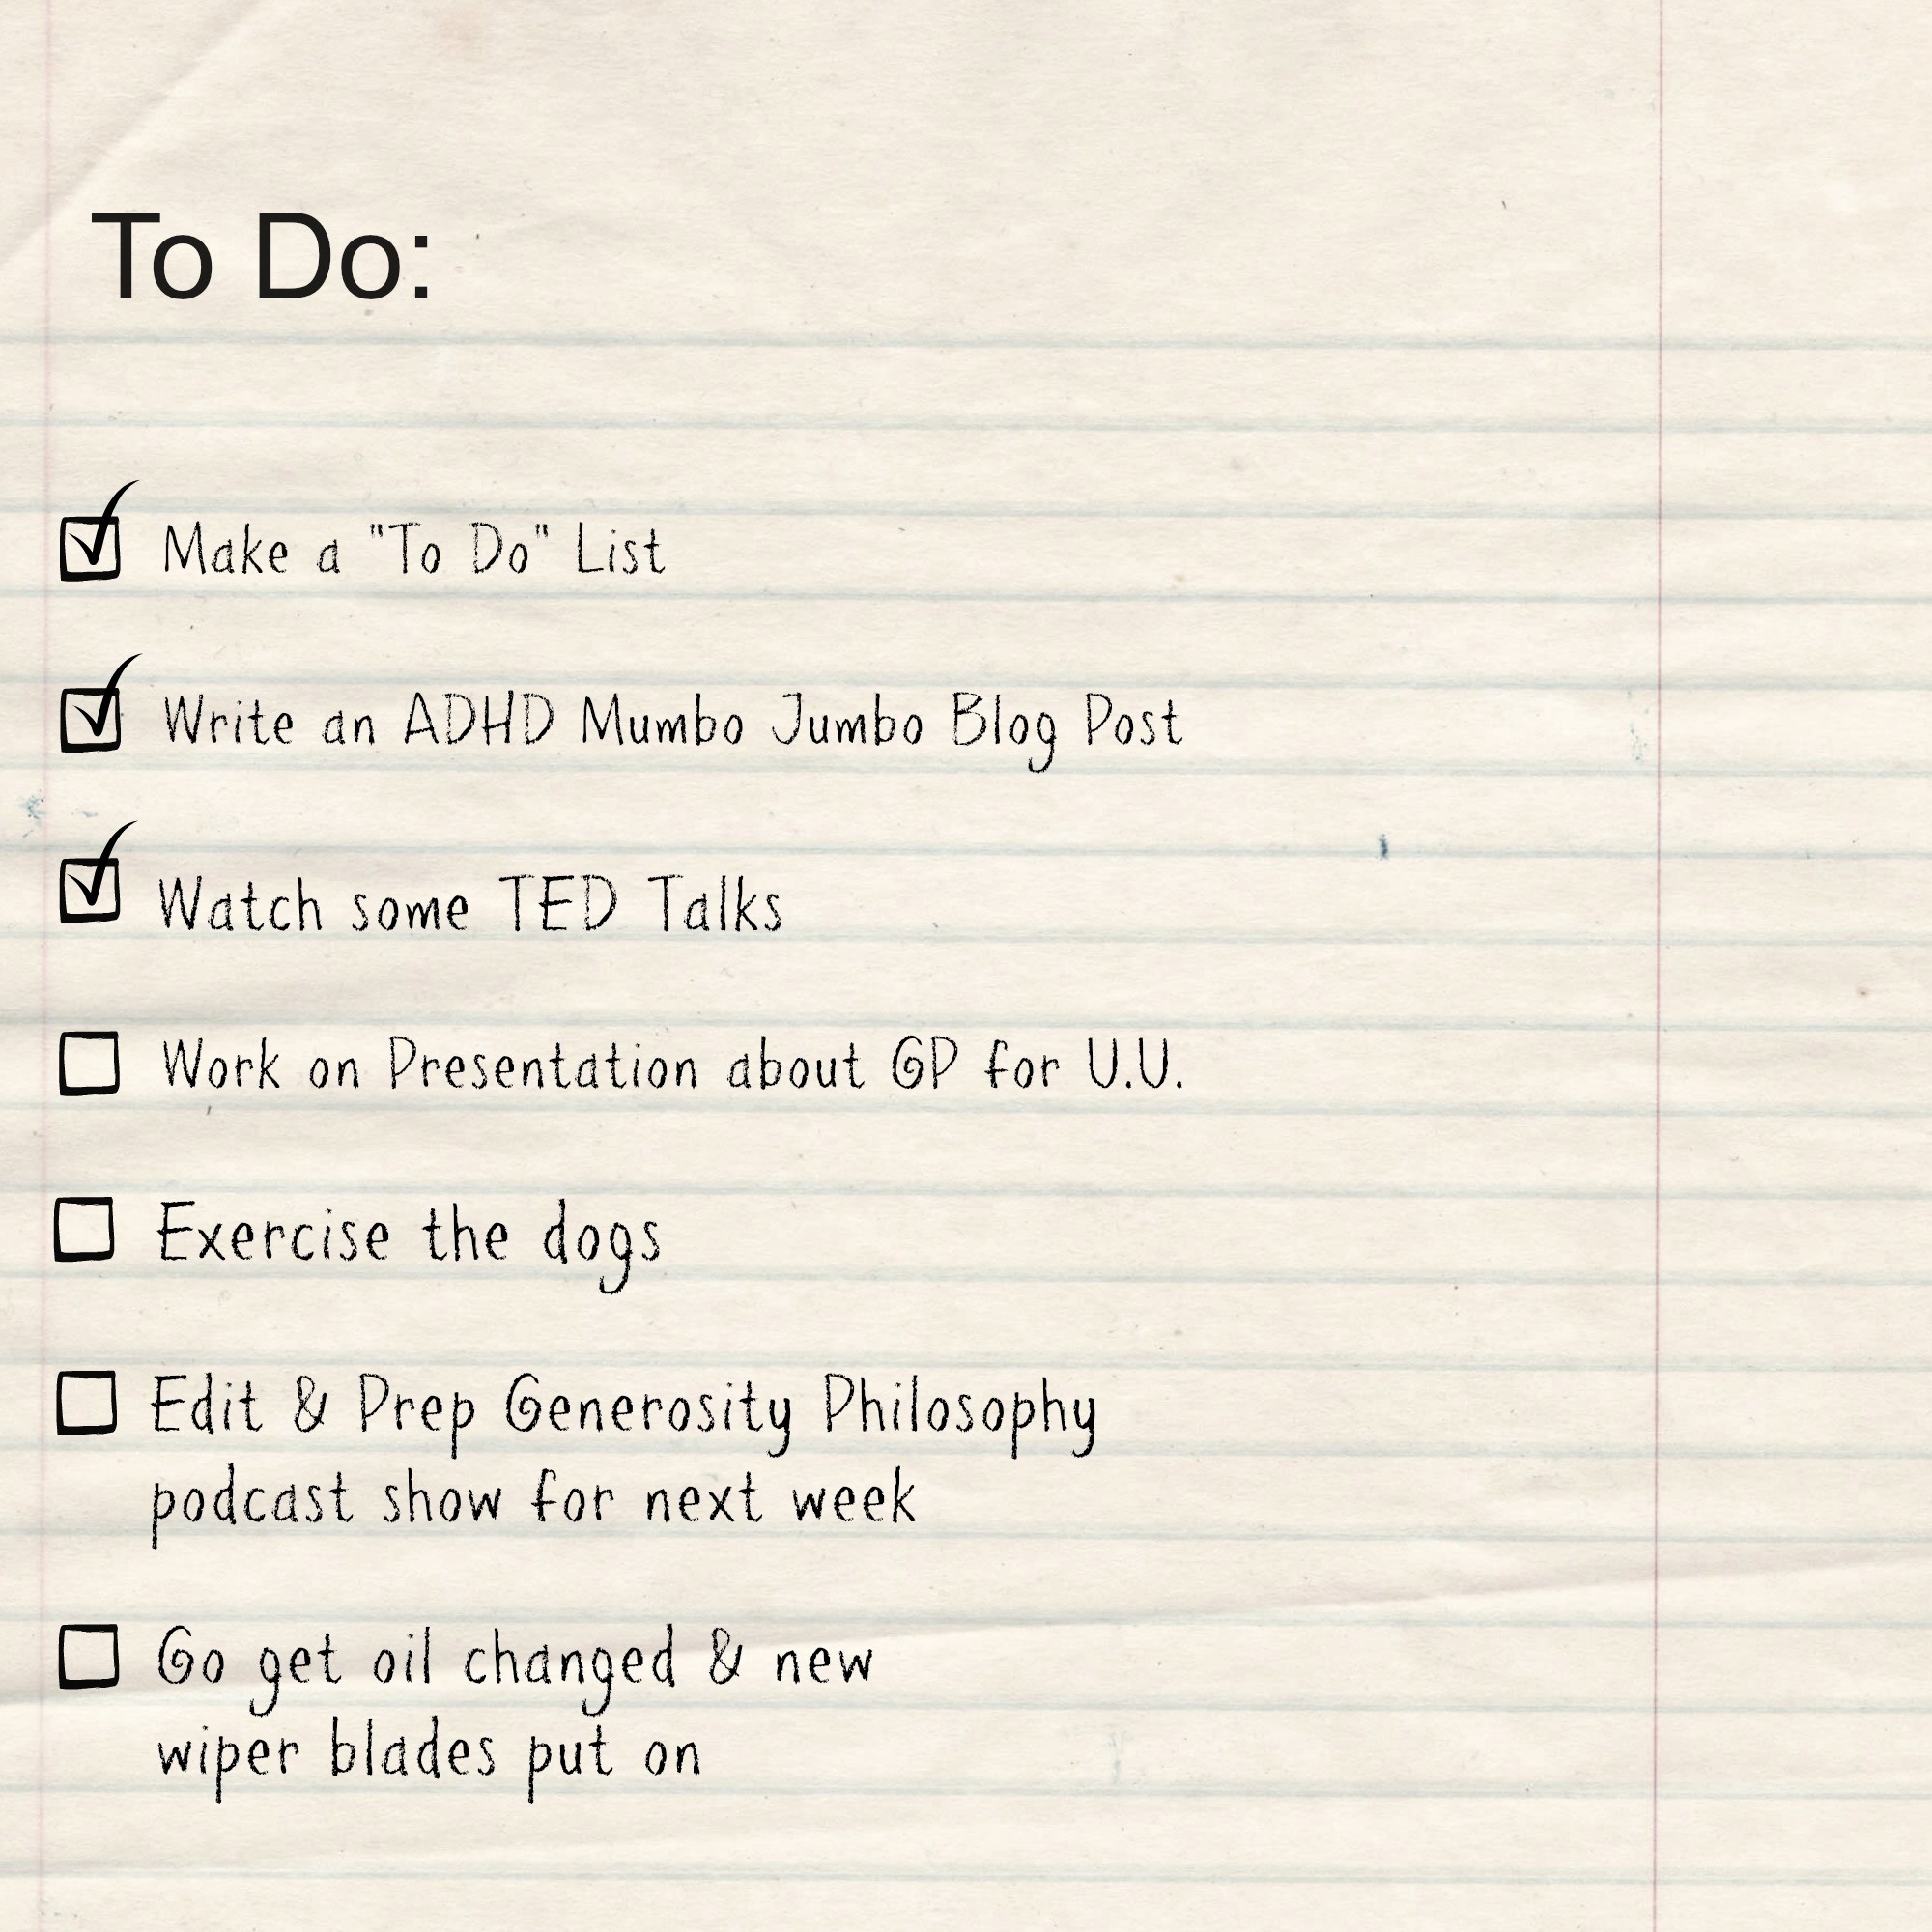 Things to Do today List Fresh the Dreaded “to Do” List